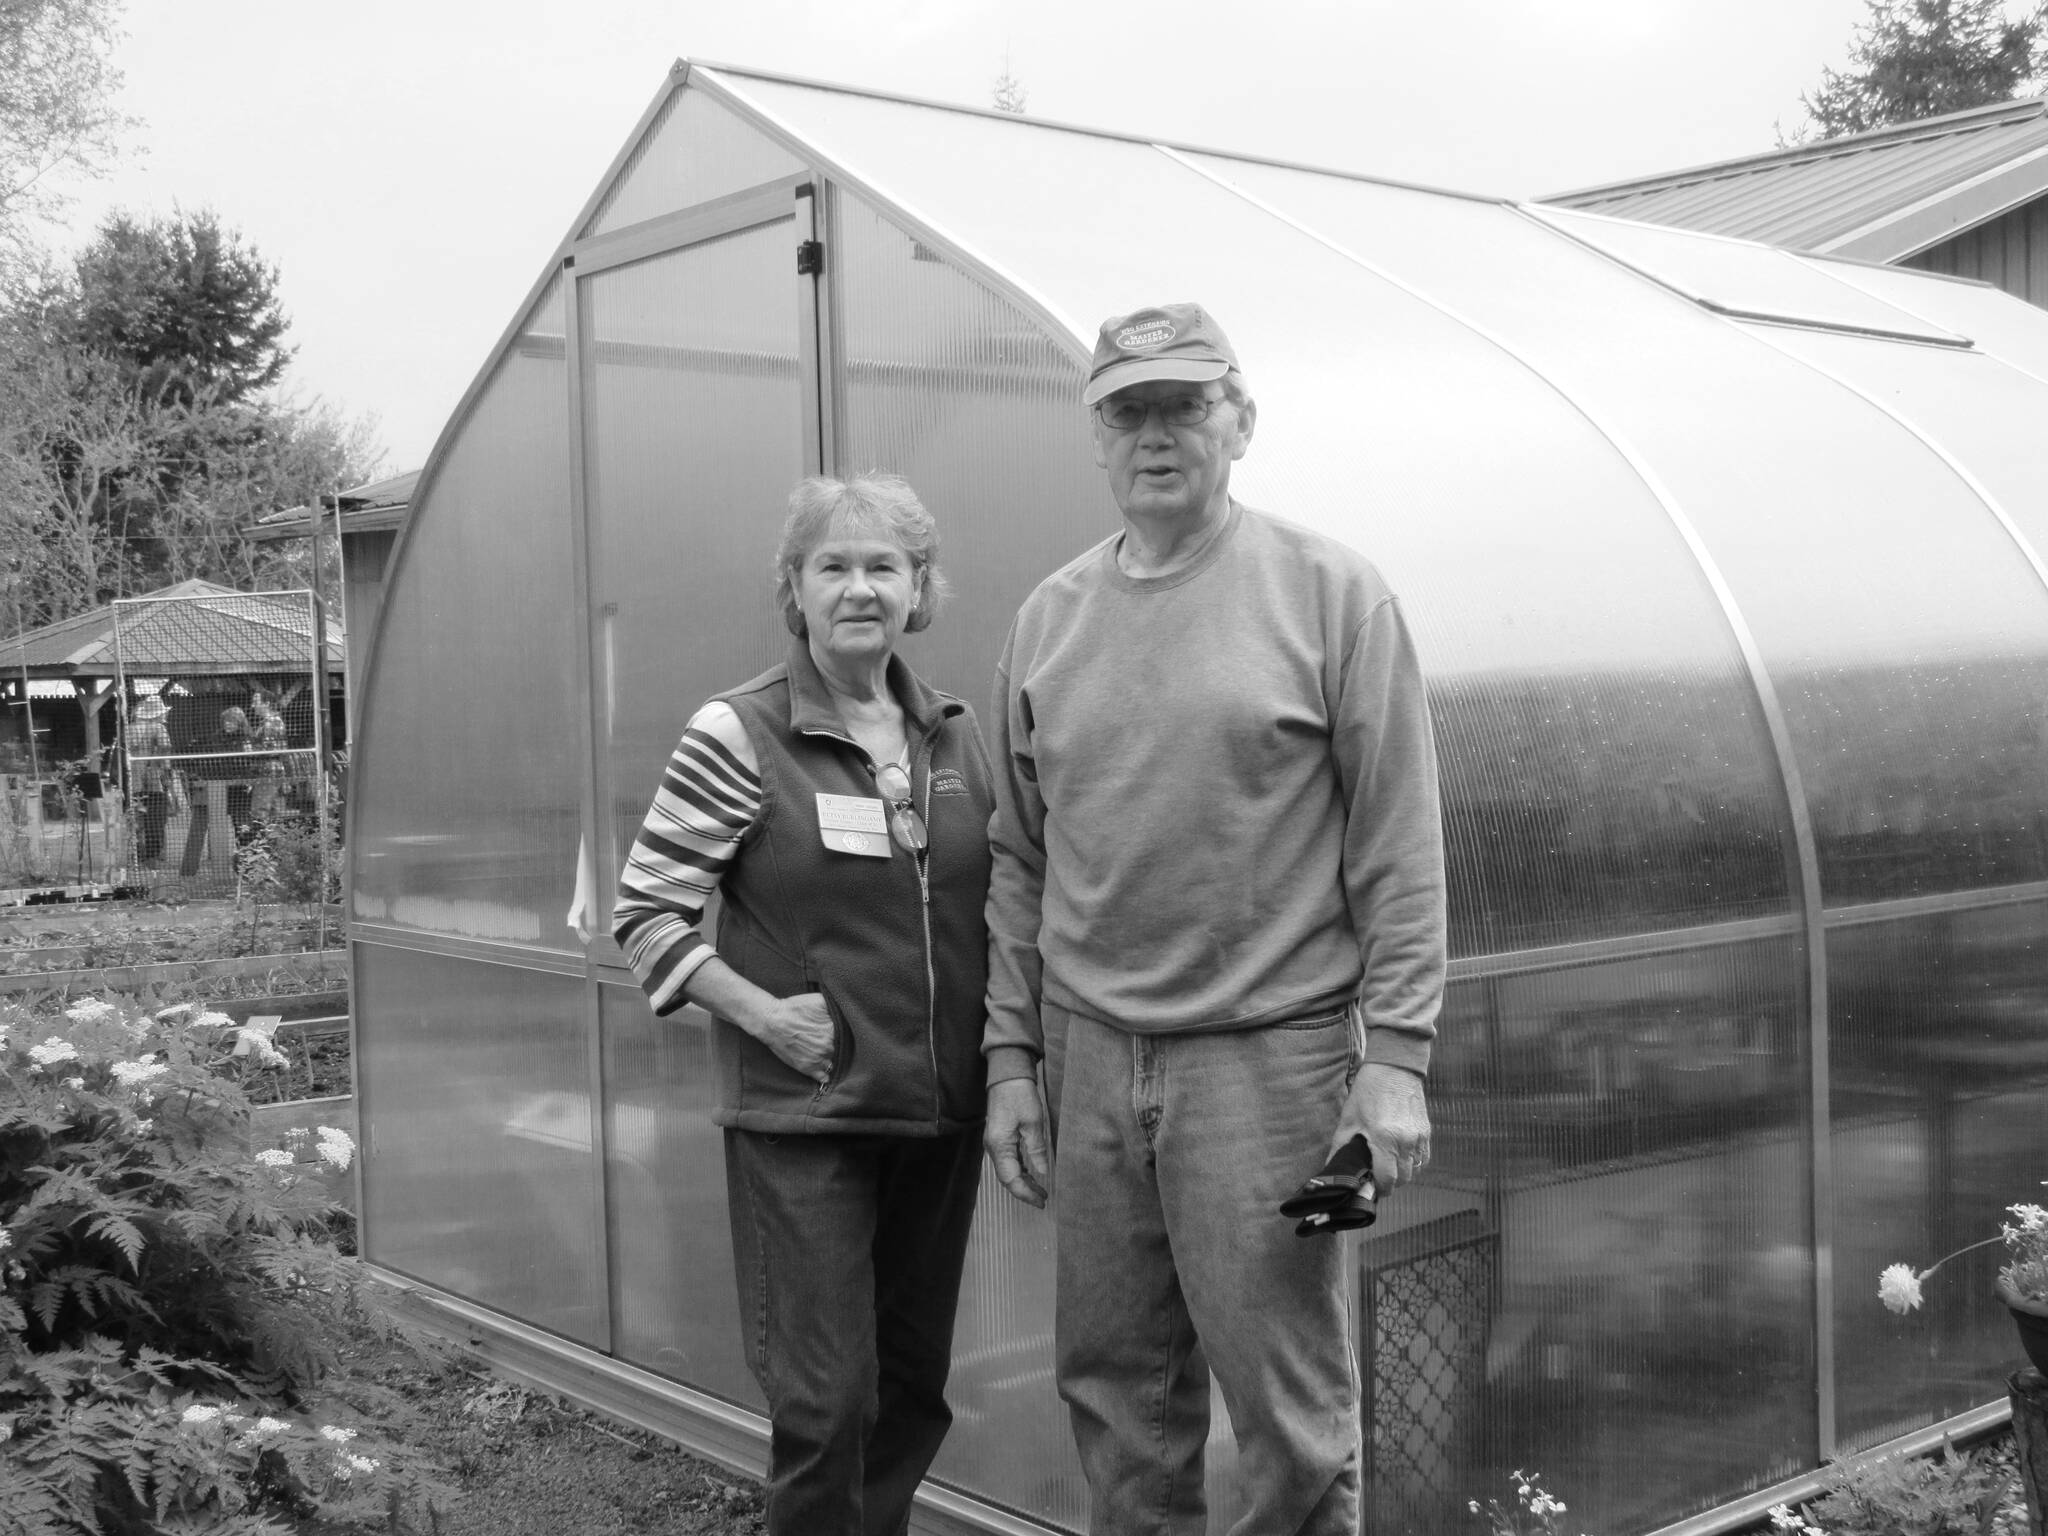 Photo by Audreen Williams / Find out how you can grow more food in your greenhouse year-round, as Master Gardeners Betsy Burlingame and David Rambin offer “Growing Food in a Greenhouse,” a Green Thumb Education Series presentation, from noon-1 p.m. Thursday, June 8, at the Port Angeles Library.